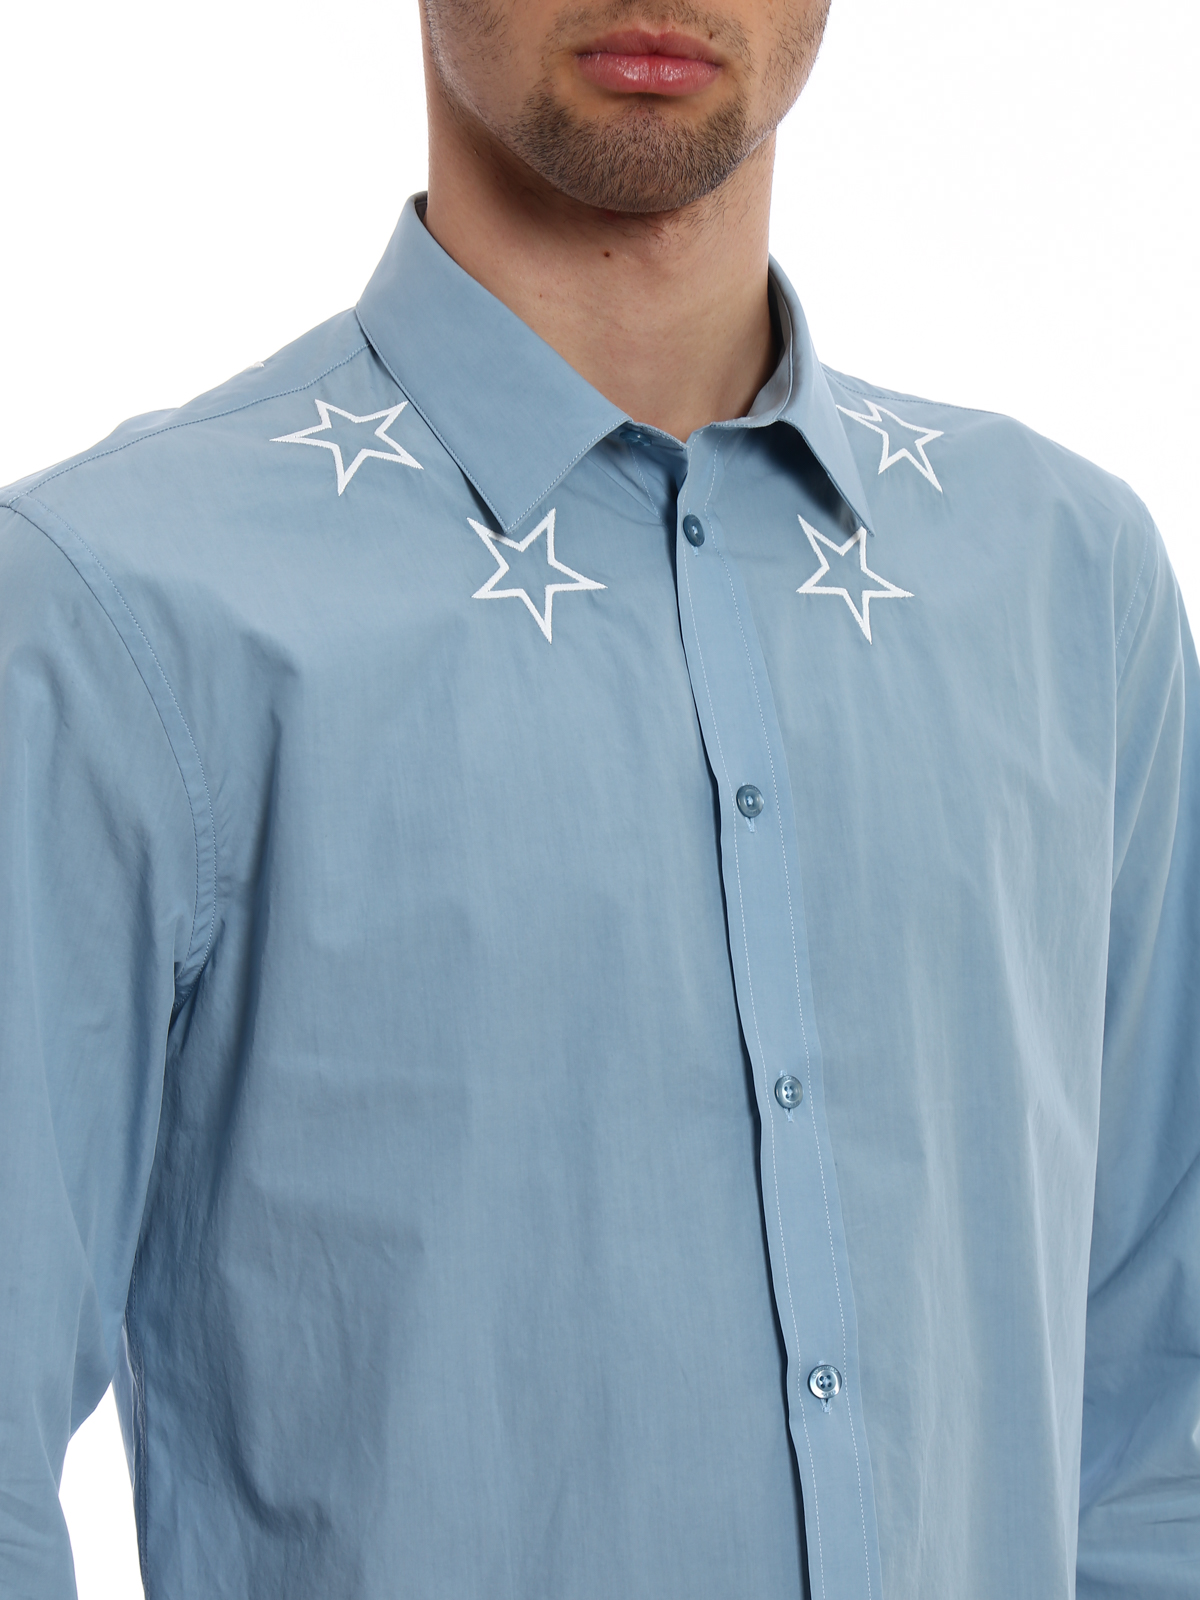 givenchy embroidered star shirt